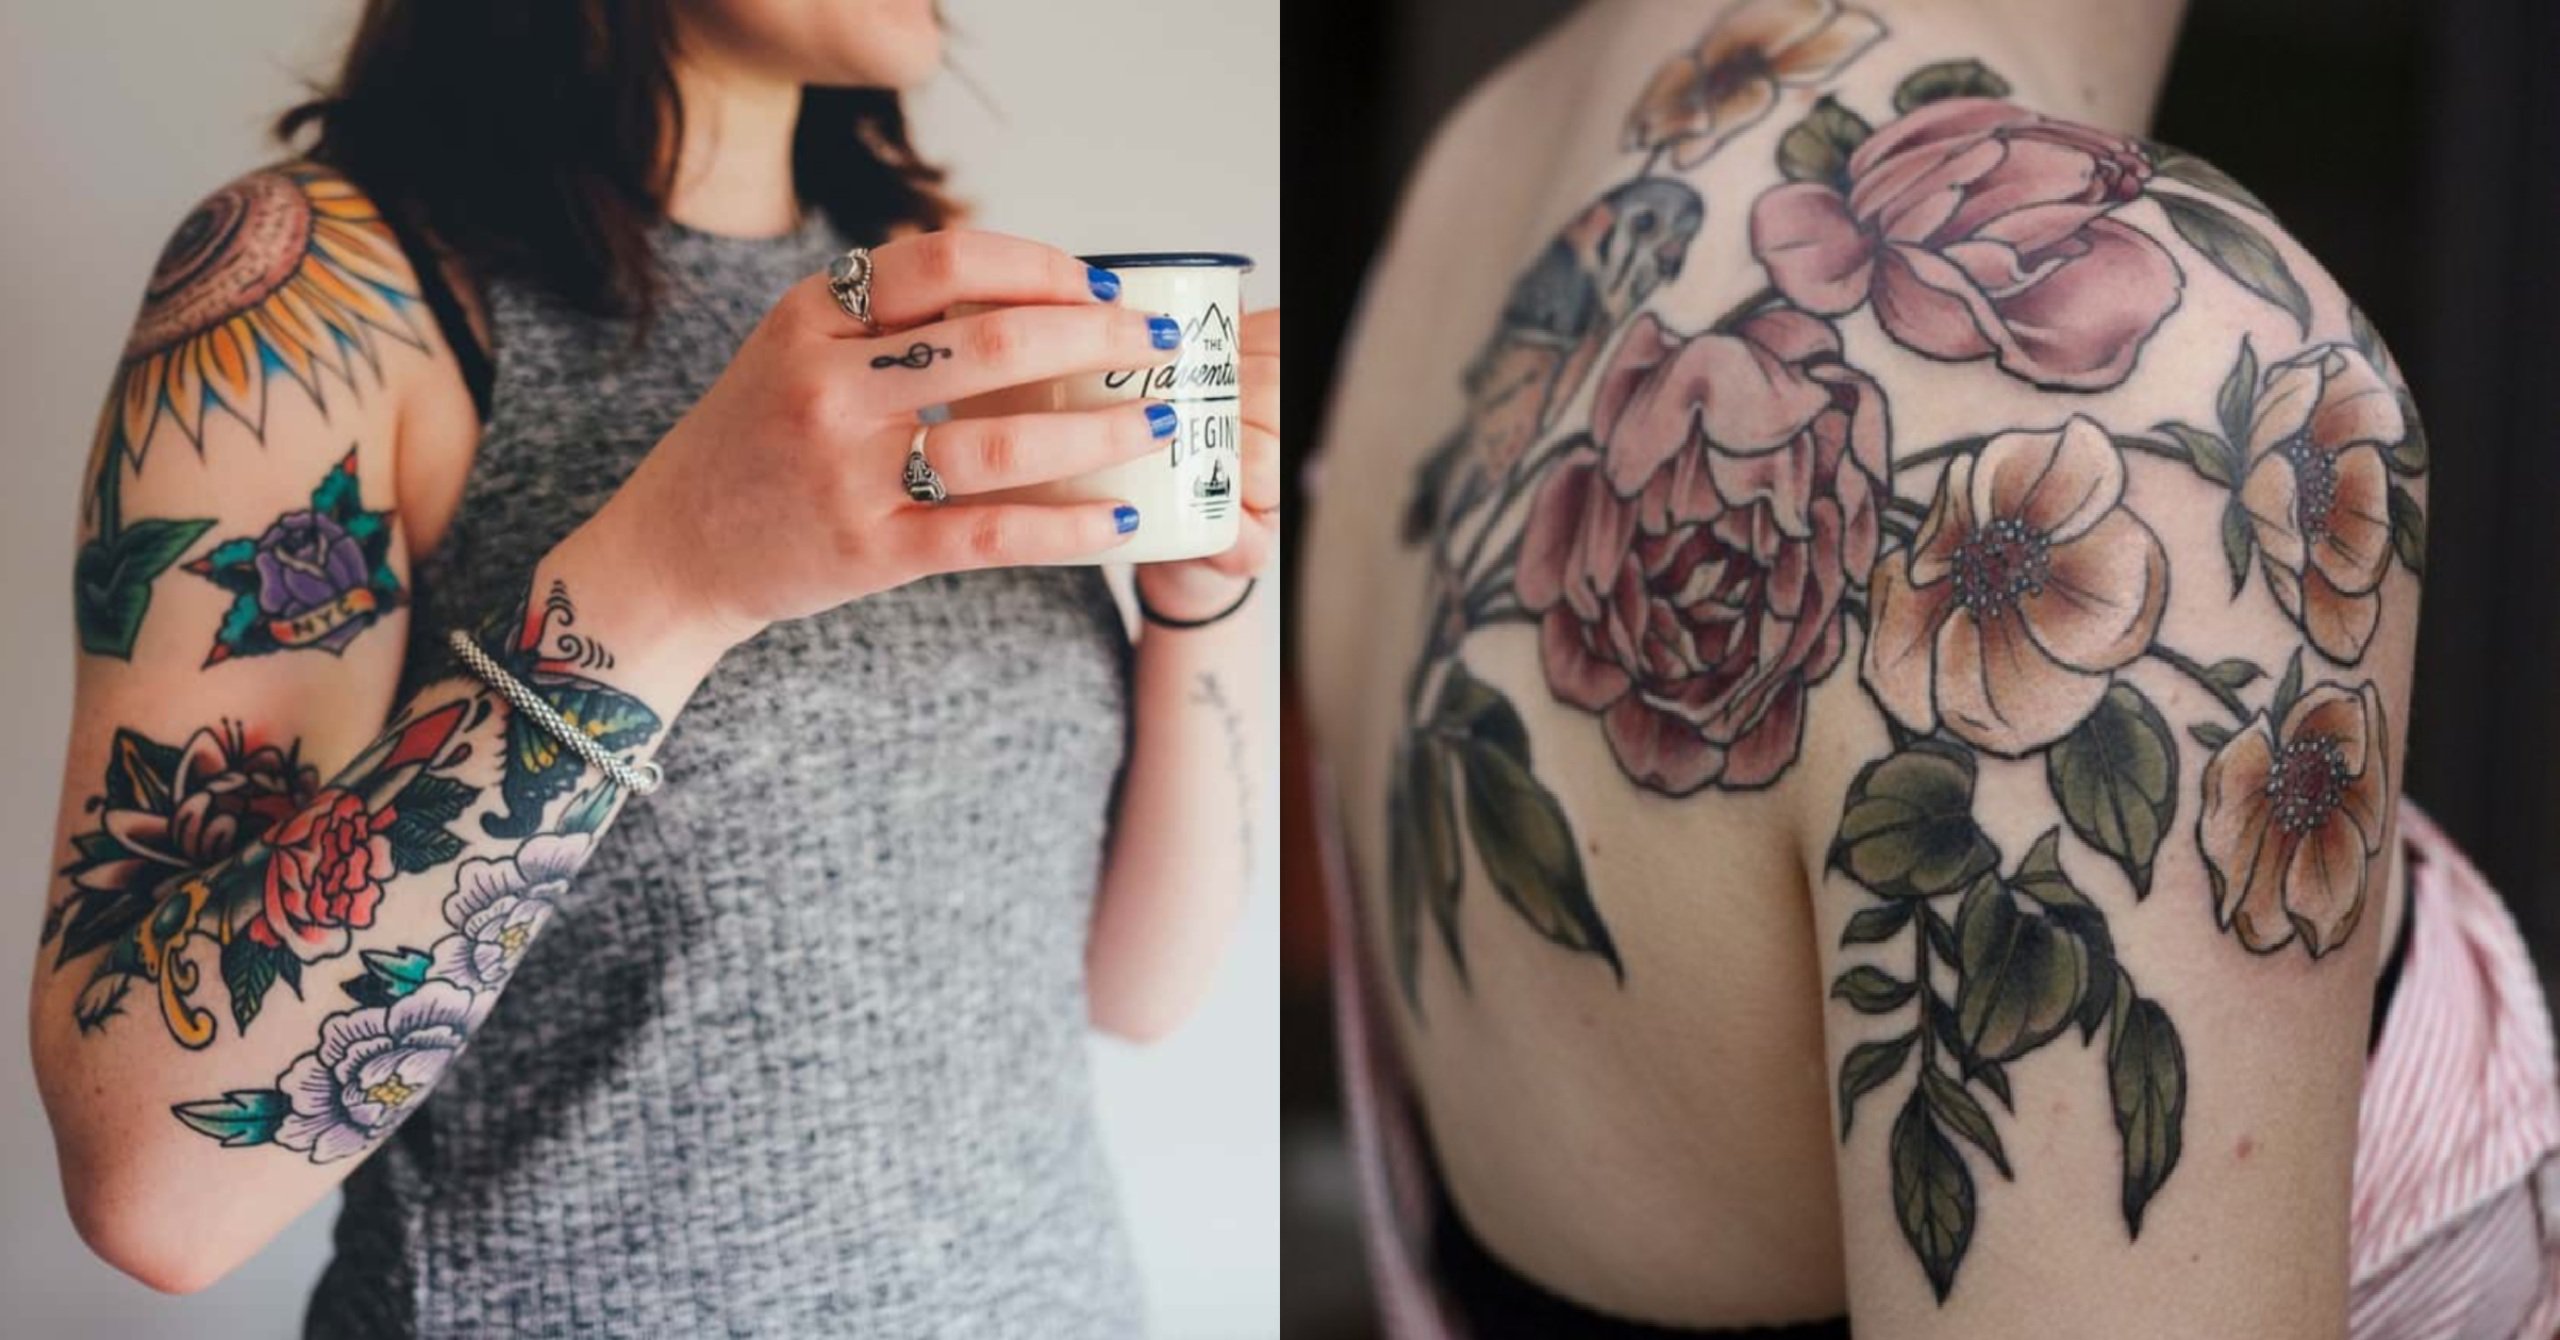 4 Things You Have To Know To Get A Vibrant Colorful Tattoo According To The  Experts